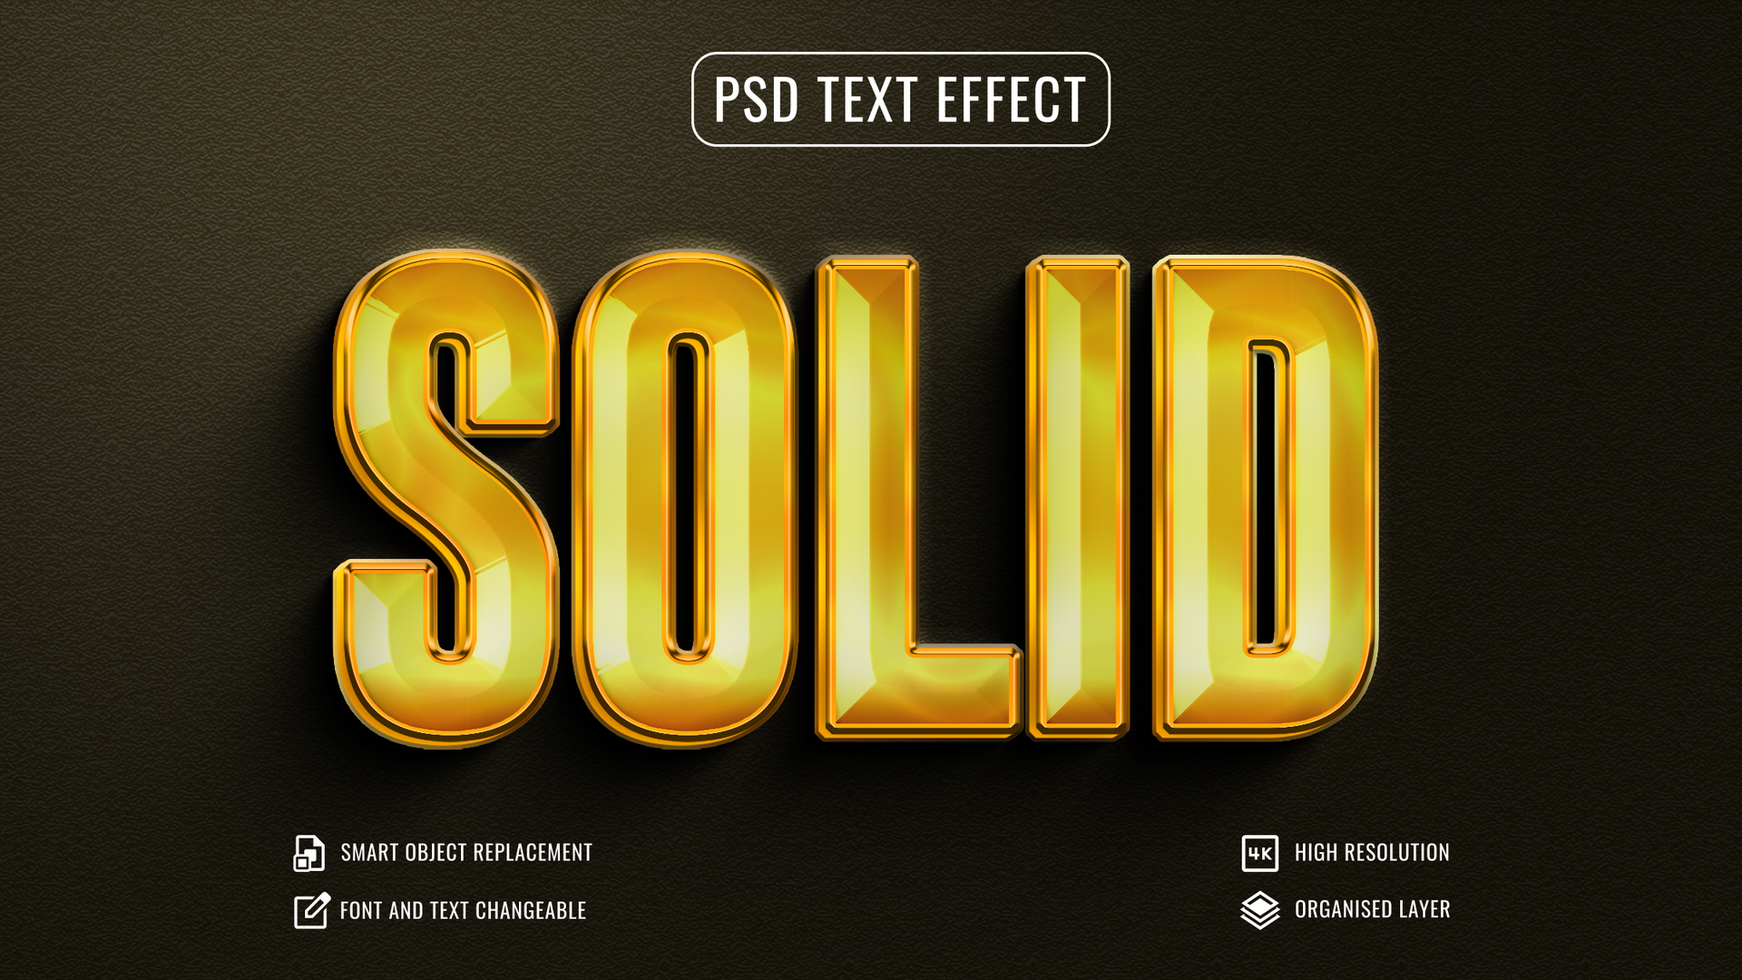 Solid gold metal text effect psd